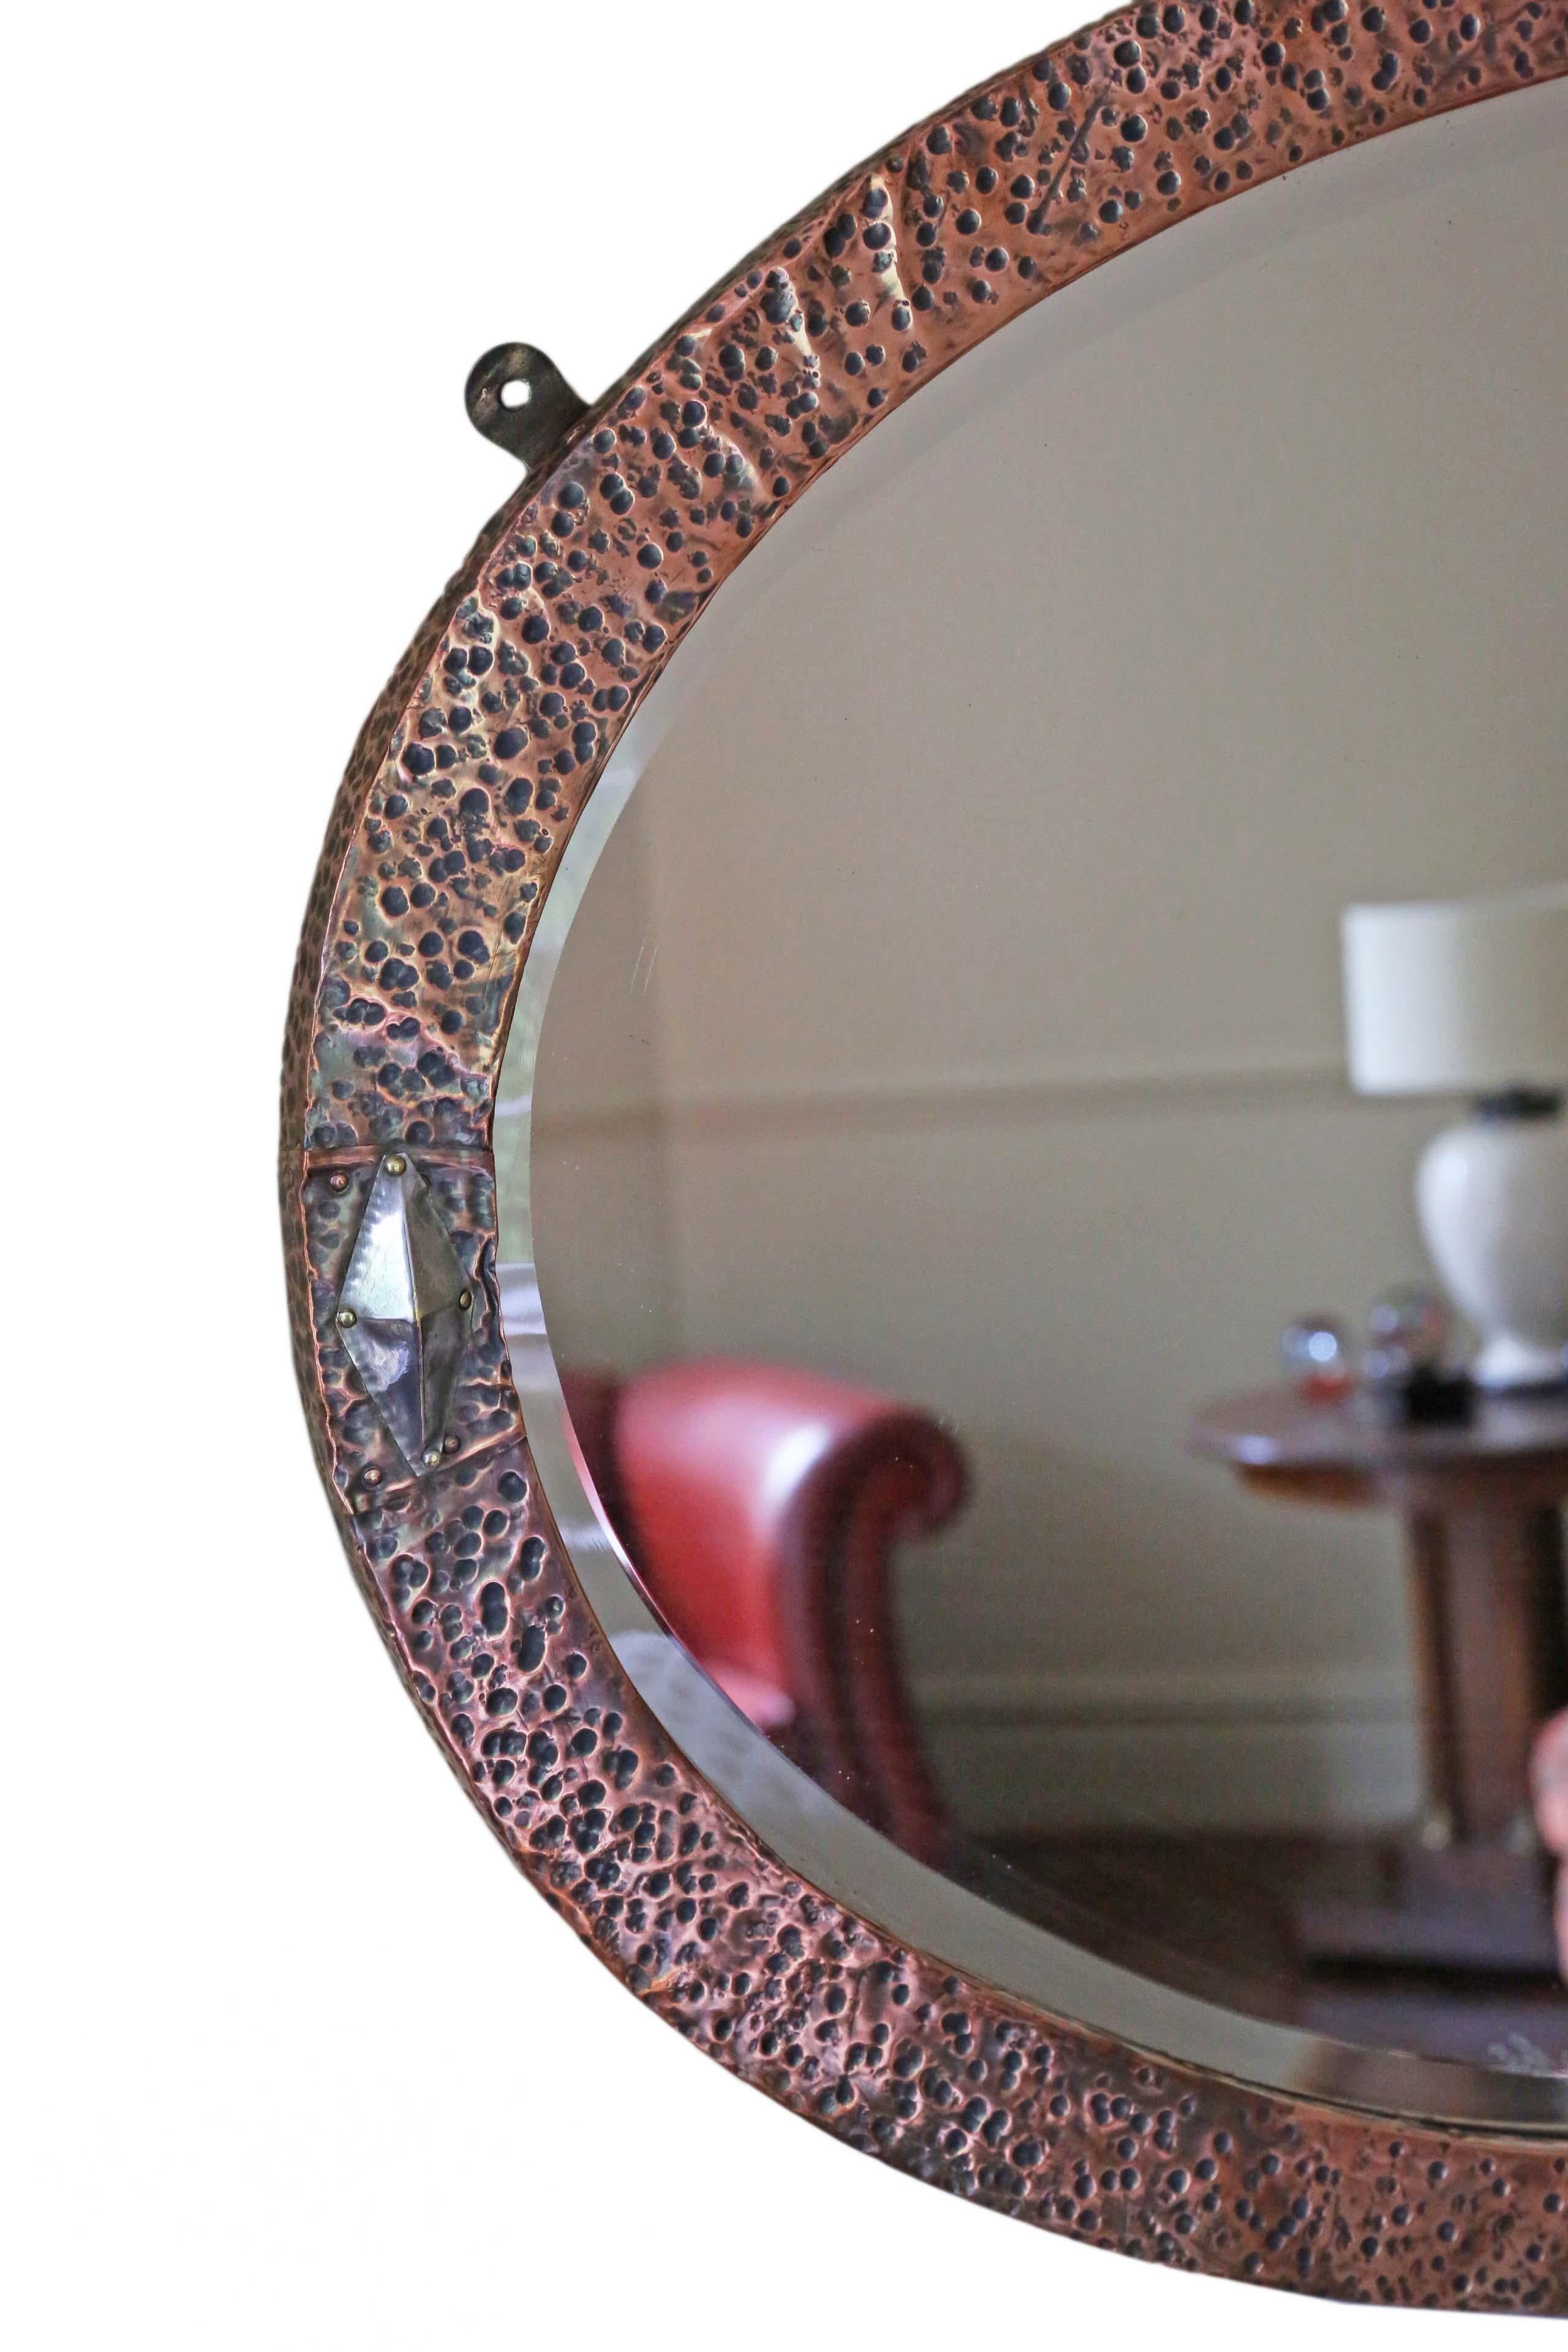 Antique quality oval Art Nouveau copper and brass overmantle or wall mirror, circa 1910.
This is a lovely mirror in a great frame in very good condition, looks great.
An impressive and rare find that would look amazing in the right location.
The